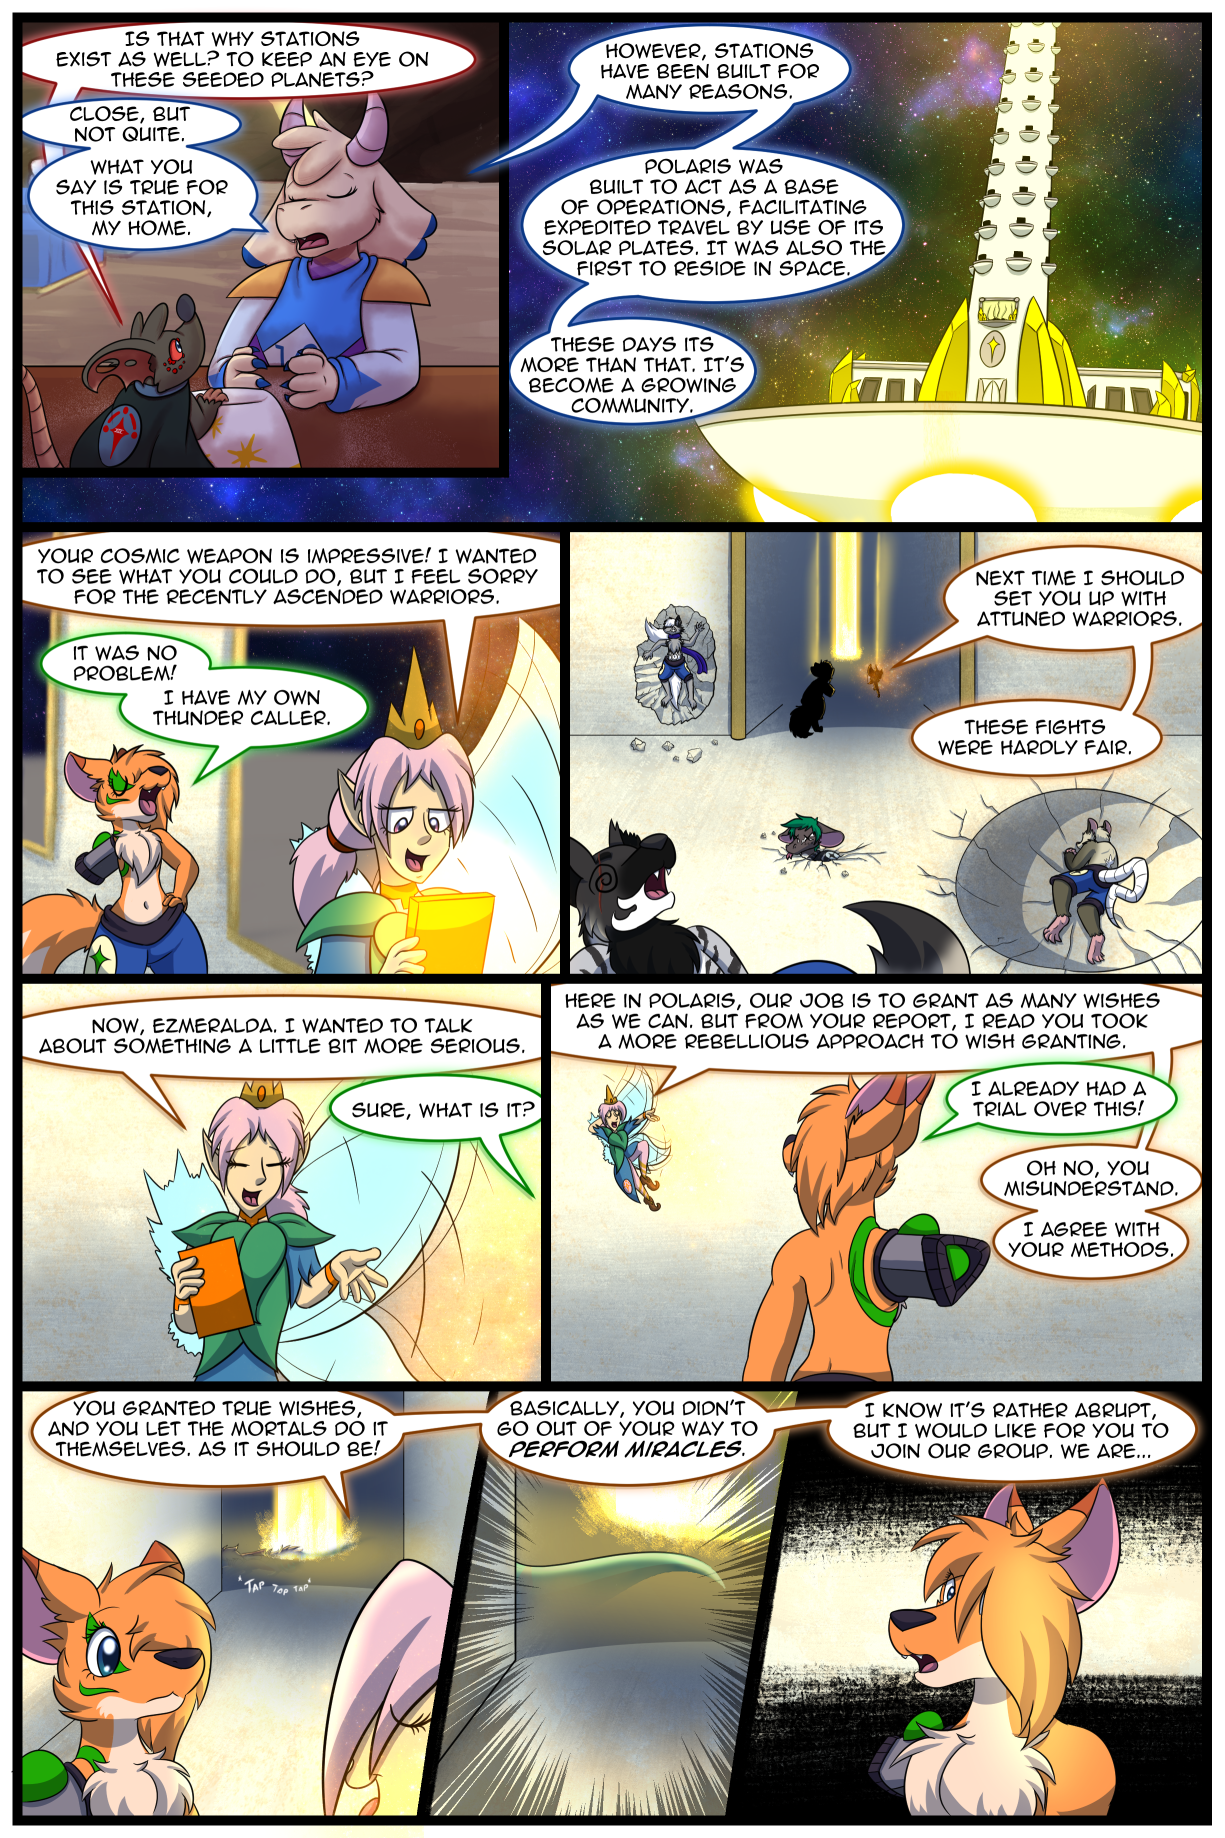 Ch5 Page 55 – Stations